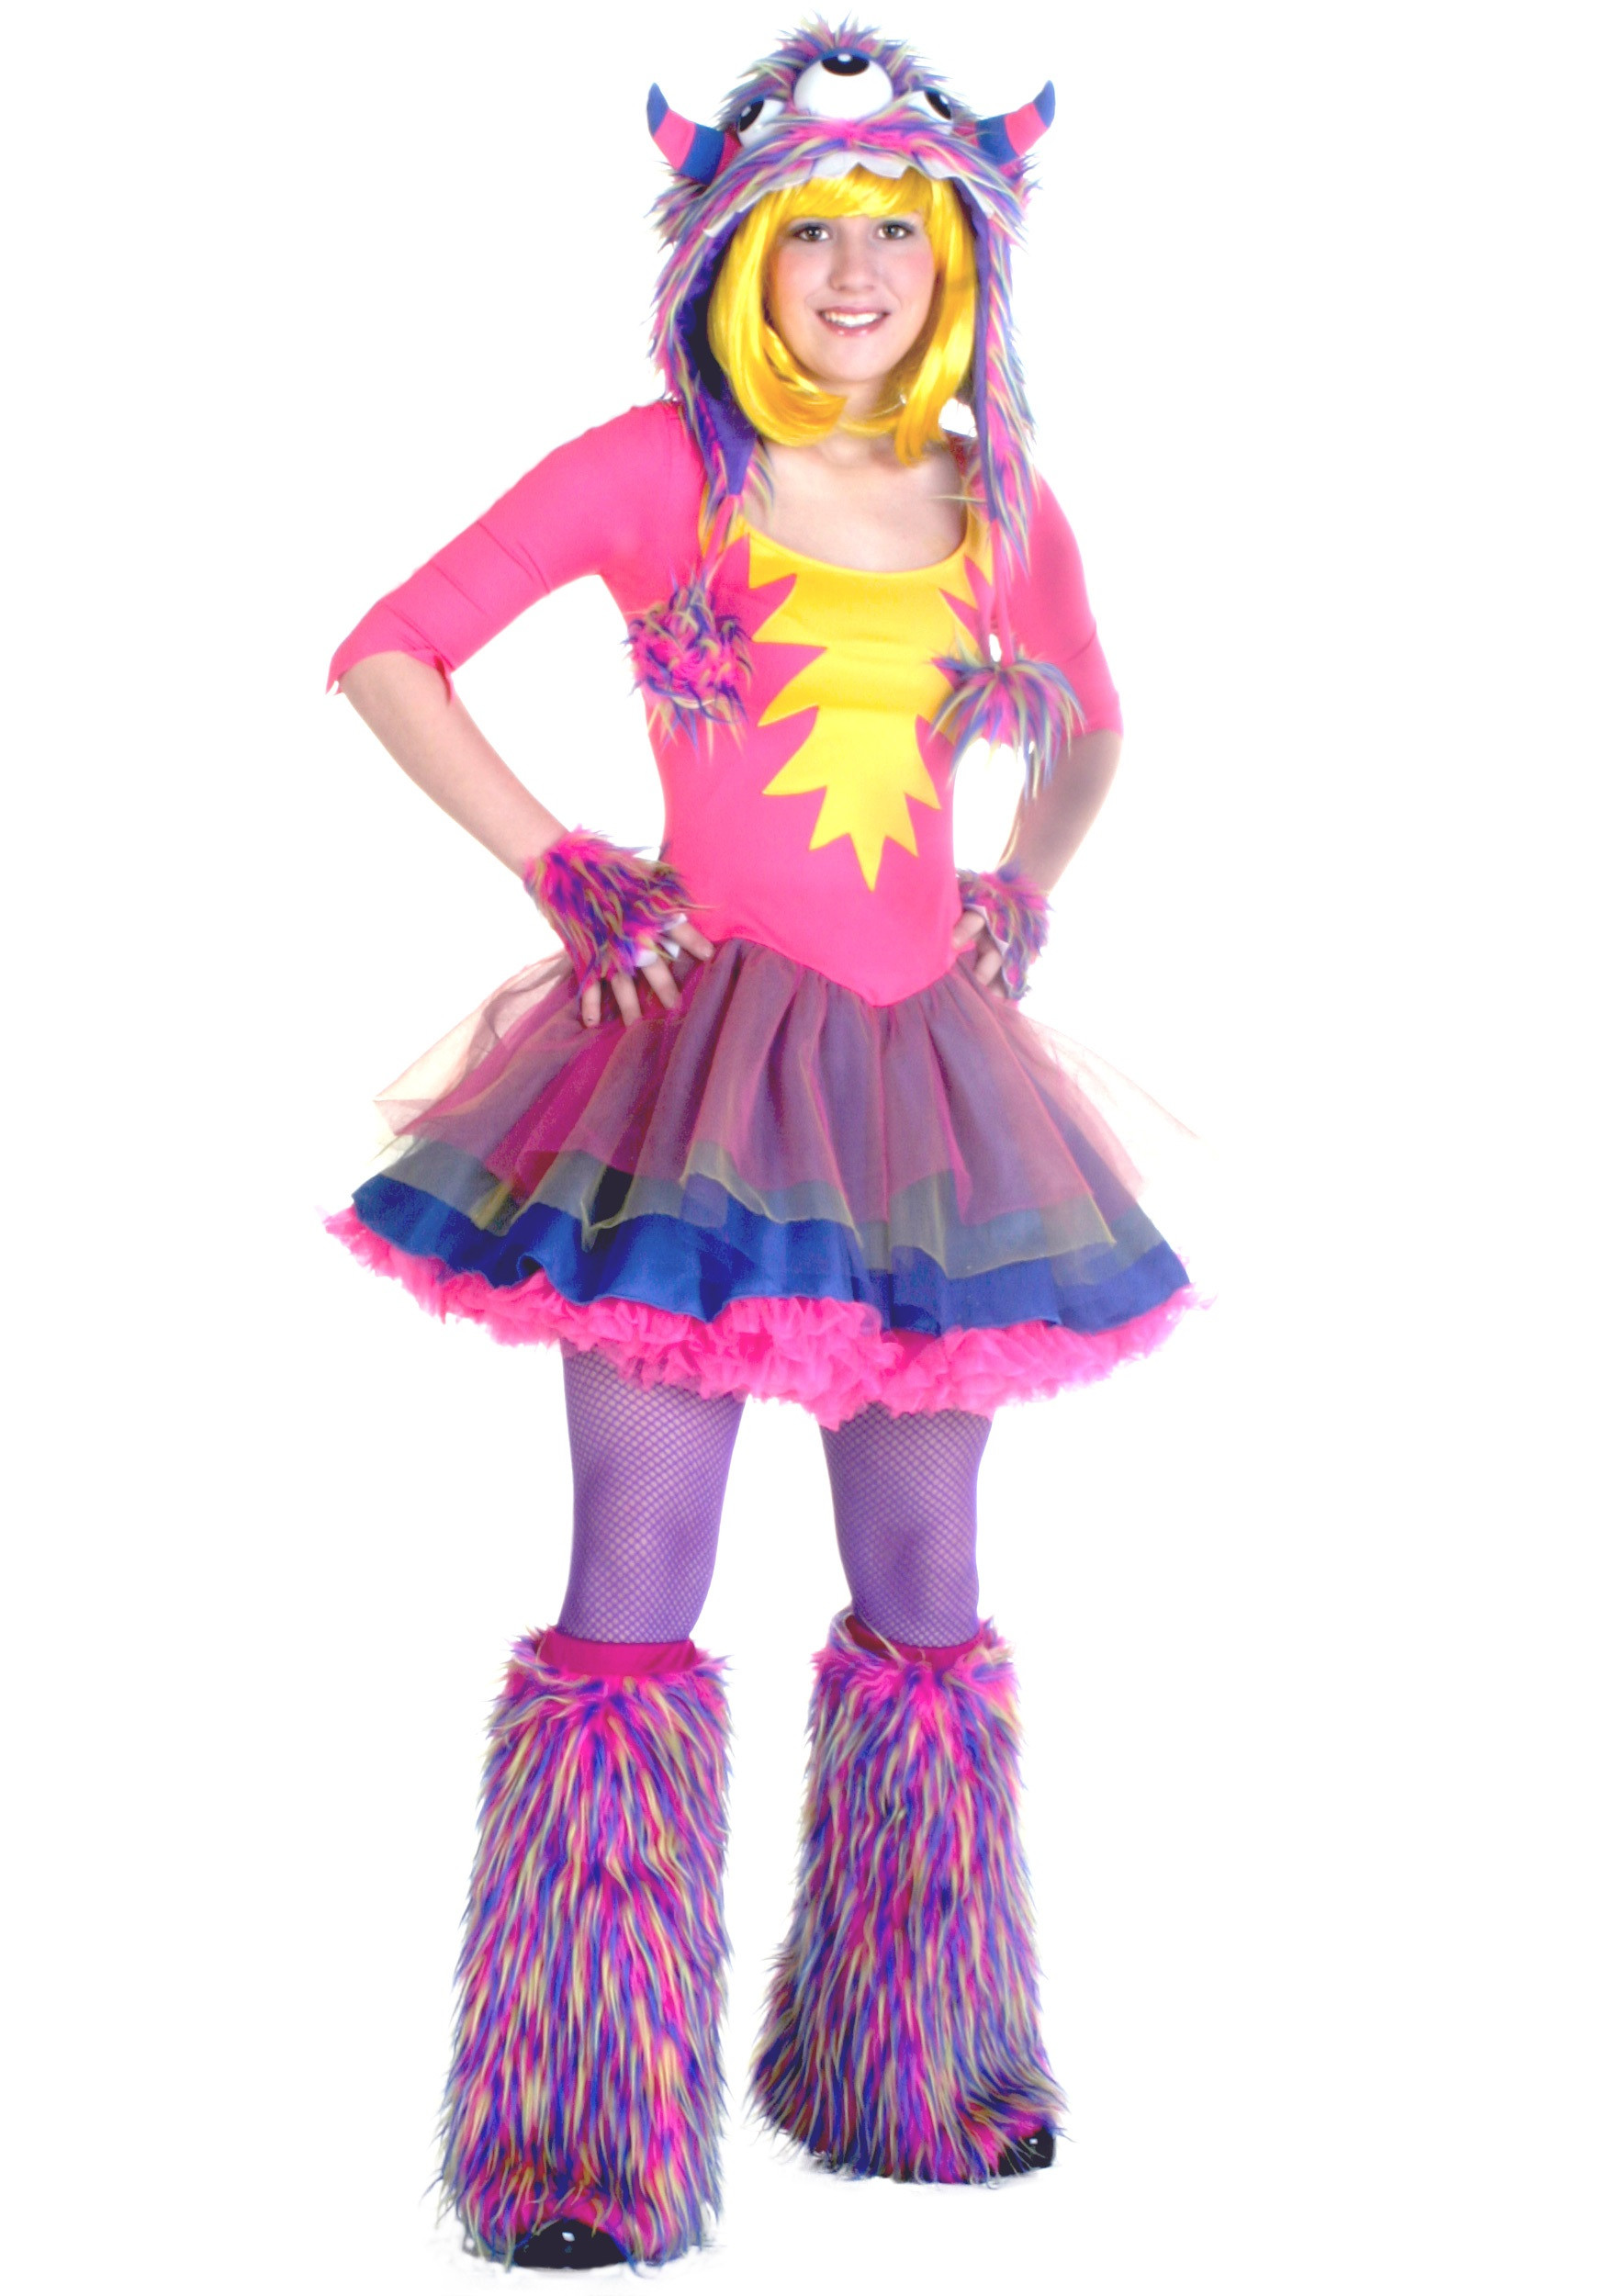 Party Halloween Costumes Ideas
 Teen Party Monster Costume